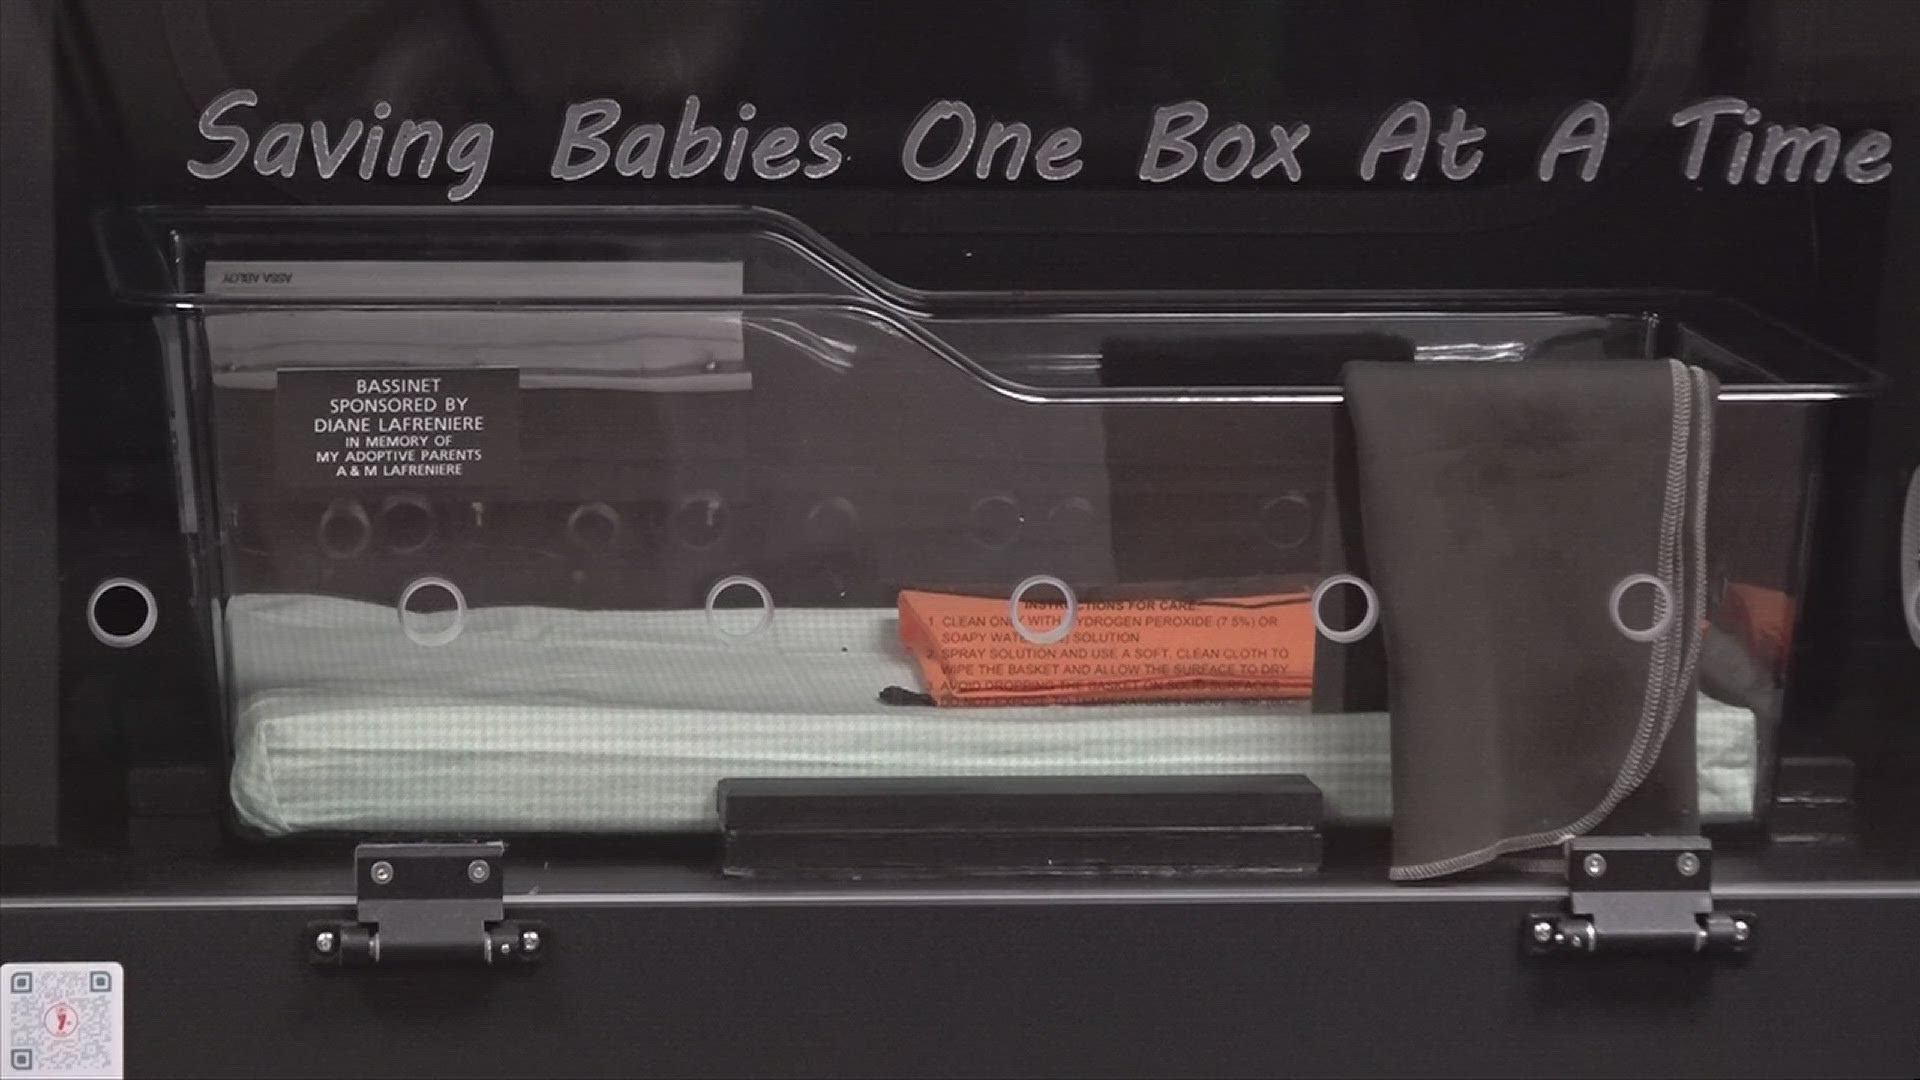 Advocates say the box's use, 12 days after its launch, is proof the concept works as a safe way for women to surrender a newborn.